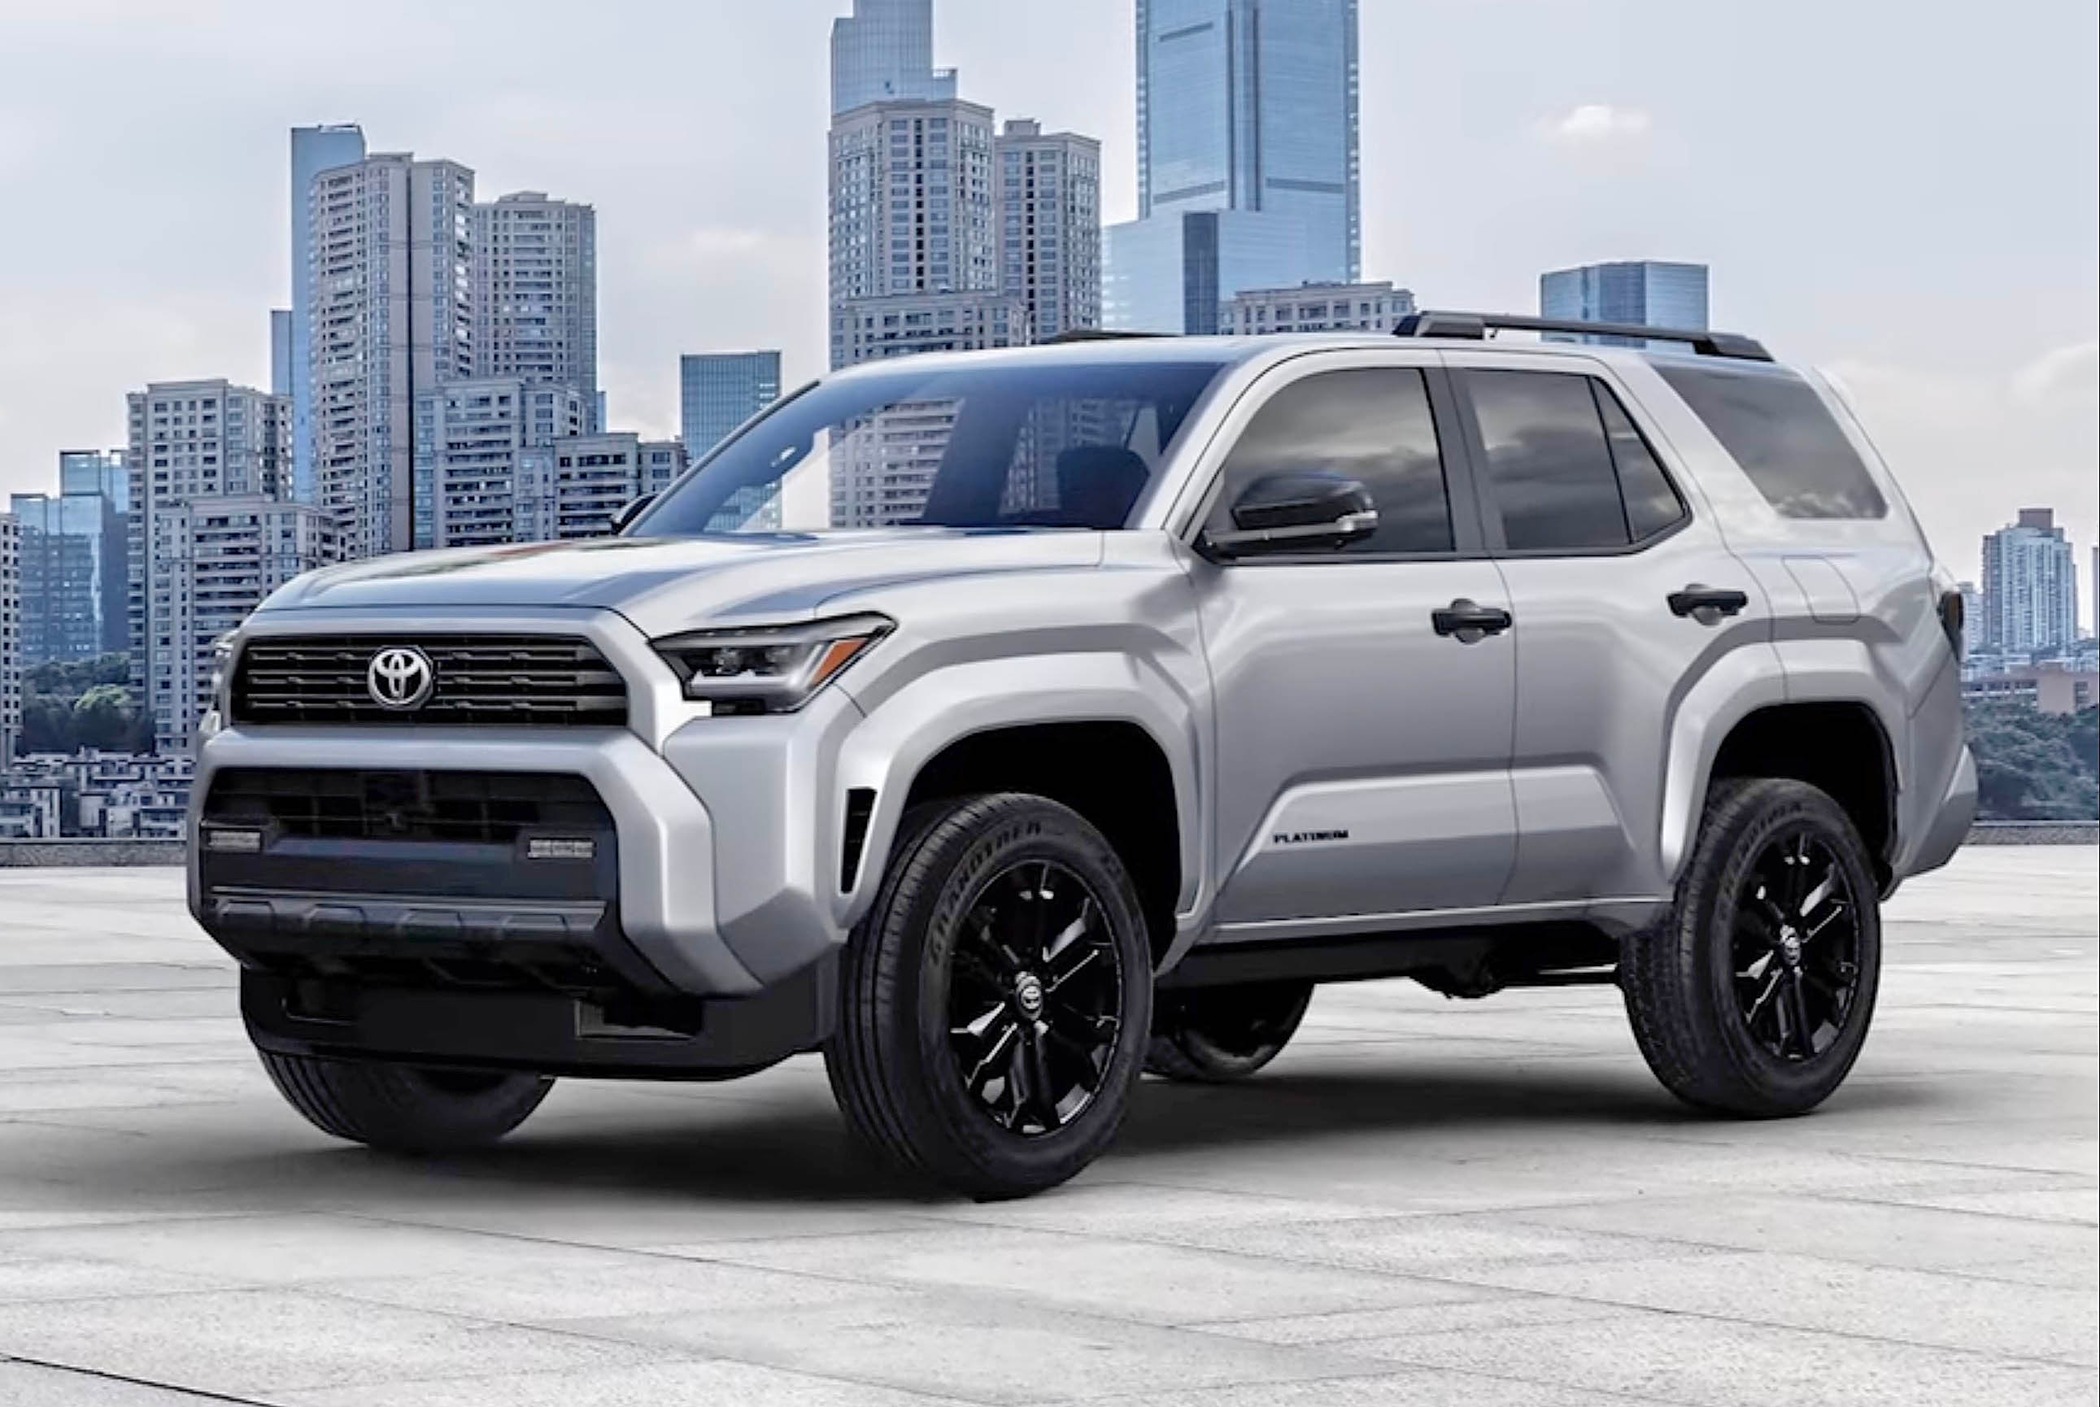 2025 Toyota 4runner PLATINUM 2025 4Runner First Look and Trim Contents + Lifted 6th Gen 4Runner Rendering) 6th gen 2025 4runner Platinum trim model